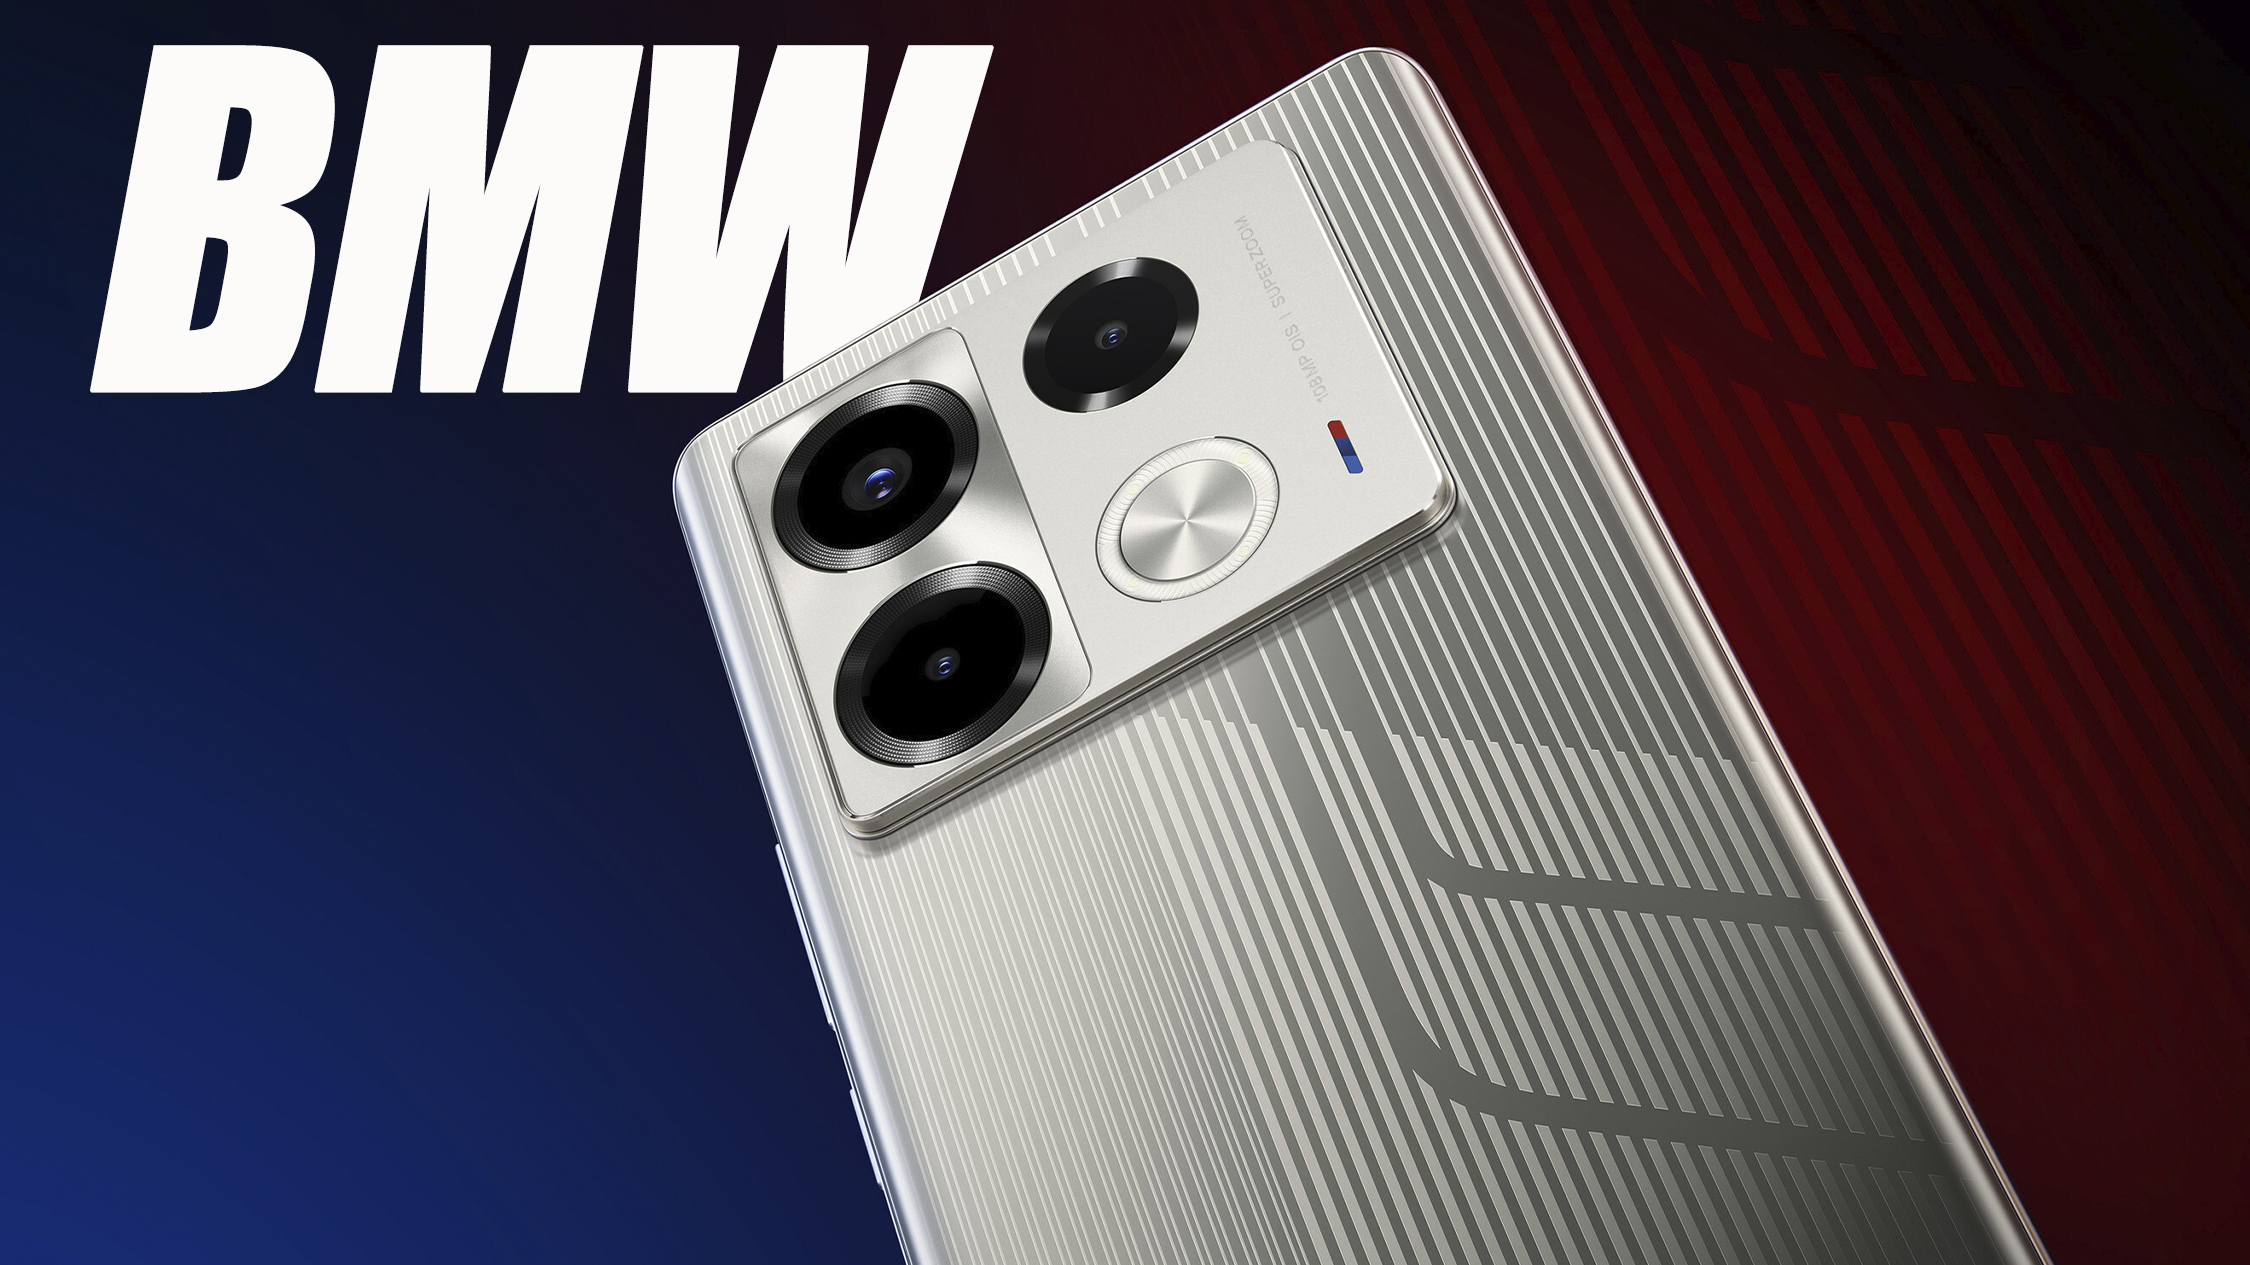 When Not Making Grilles, BMW’s Design Team Styles Budget Phones